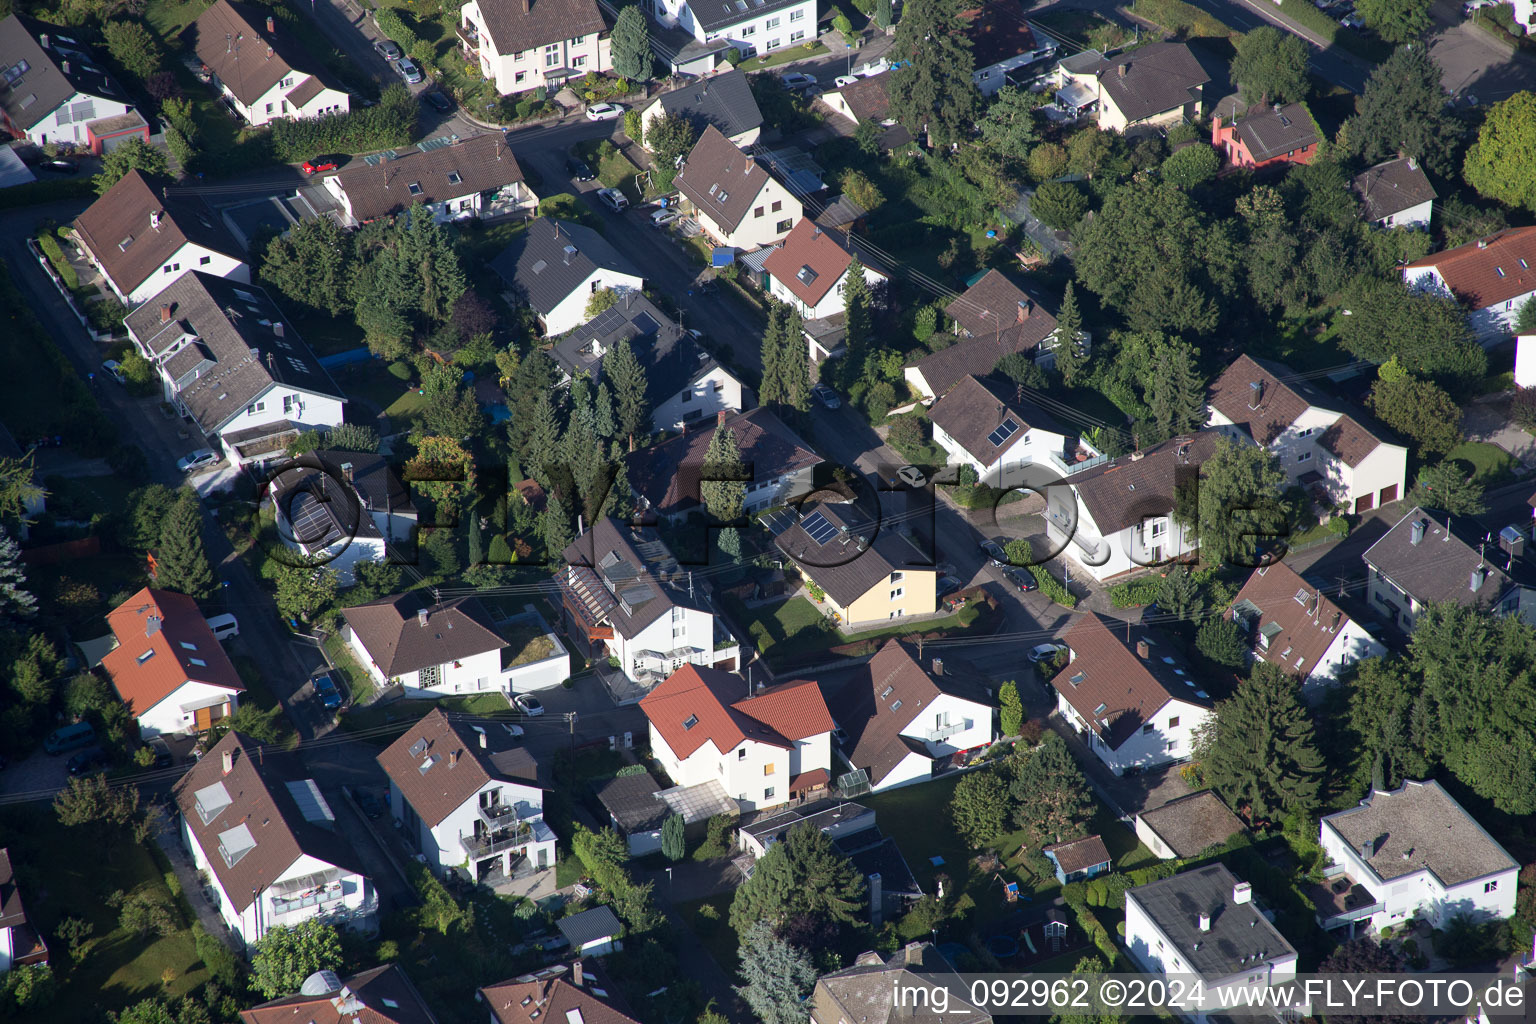 Aerial view of Settlement area in the district Wolfartsweier in Karlsruhe in the state Baden-Wurttemberg, Germany